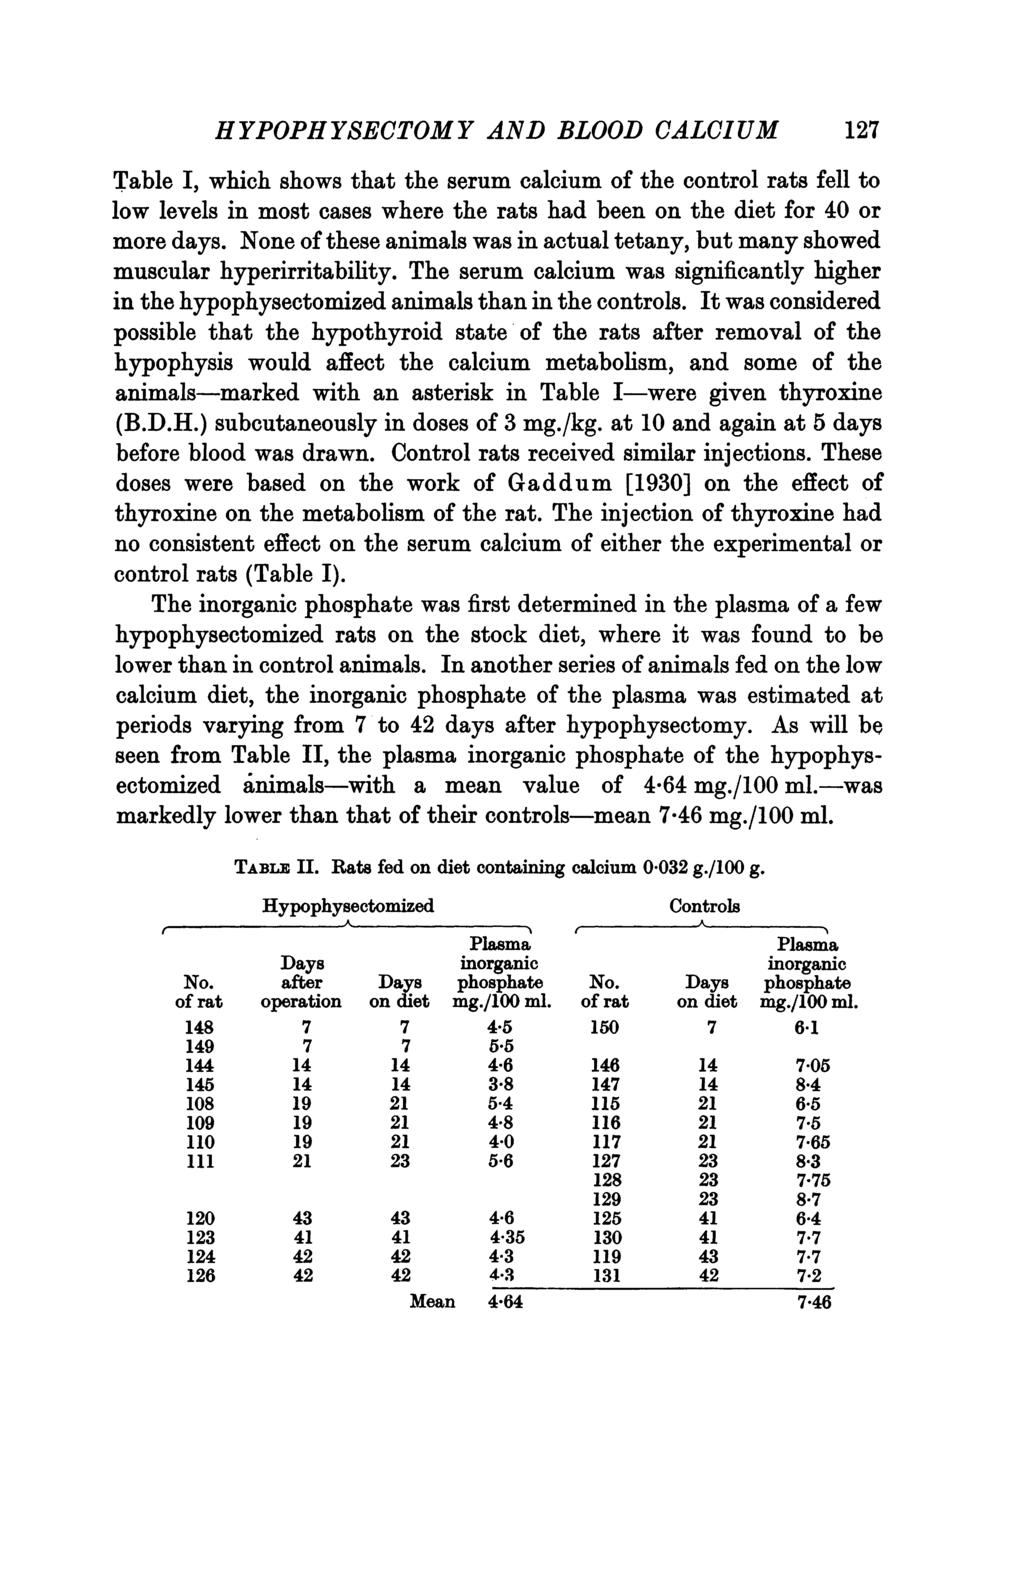 HYPOPHYSECTOMY AND BLOOD CALCIUM 127 Table I, which shows that the serum calcium of the control rats fell to low levels in most cases where the rats had been on the diet for 40 or more days.